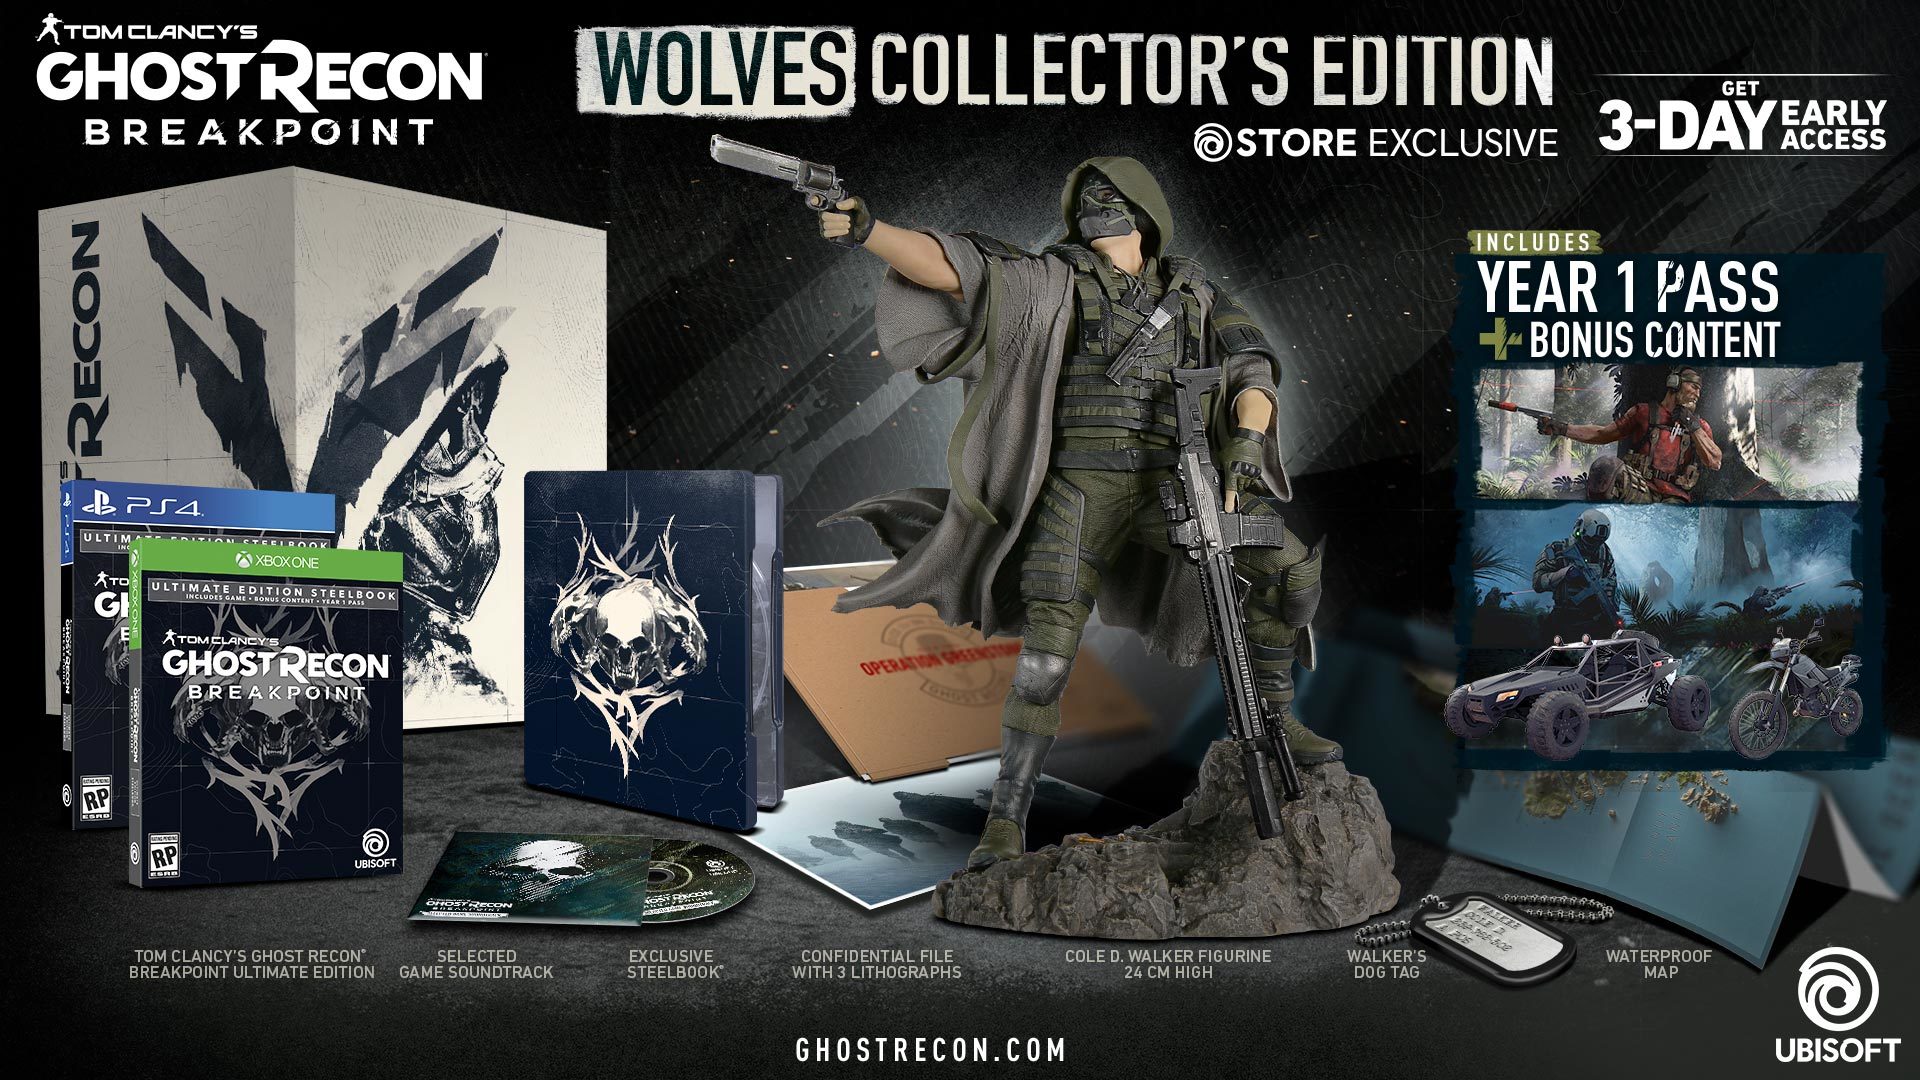 Tom Clancy's Ghost Recon: Breakpoint - Wolves Collector's Edition (PS4), Ubisoft